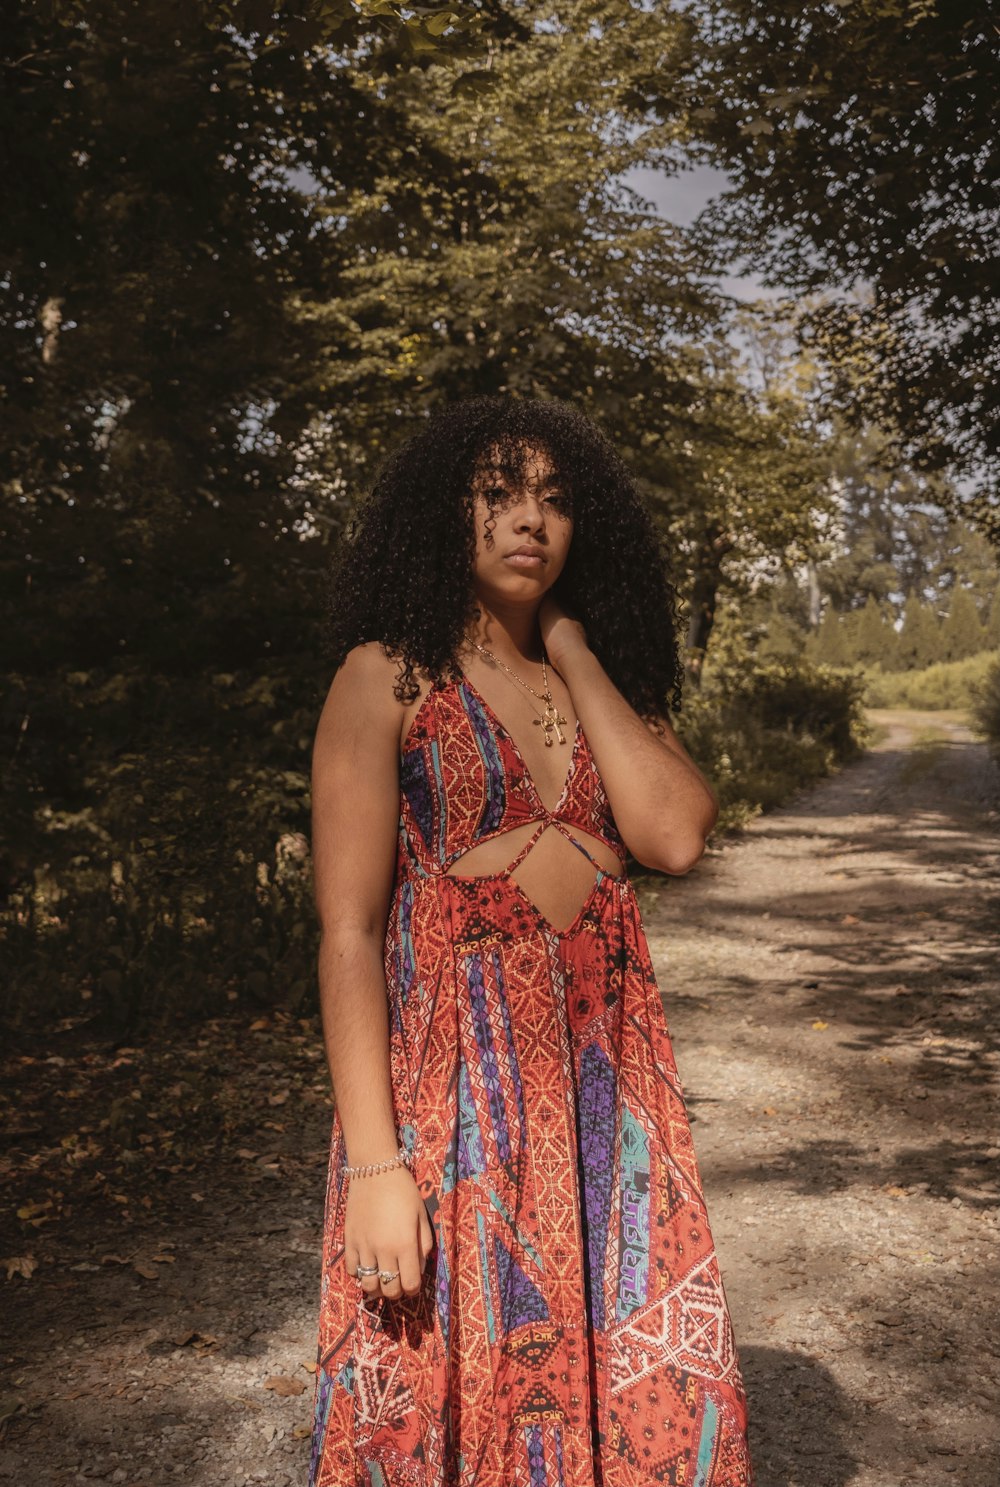 woman in blue and red floral halter top dress standing on brown dirt road during daytime